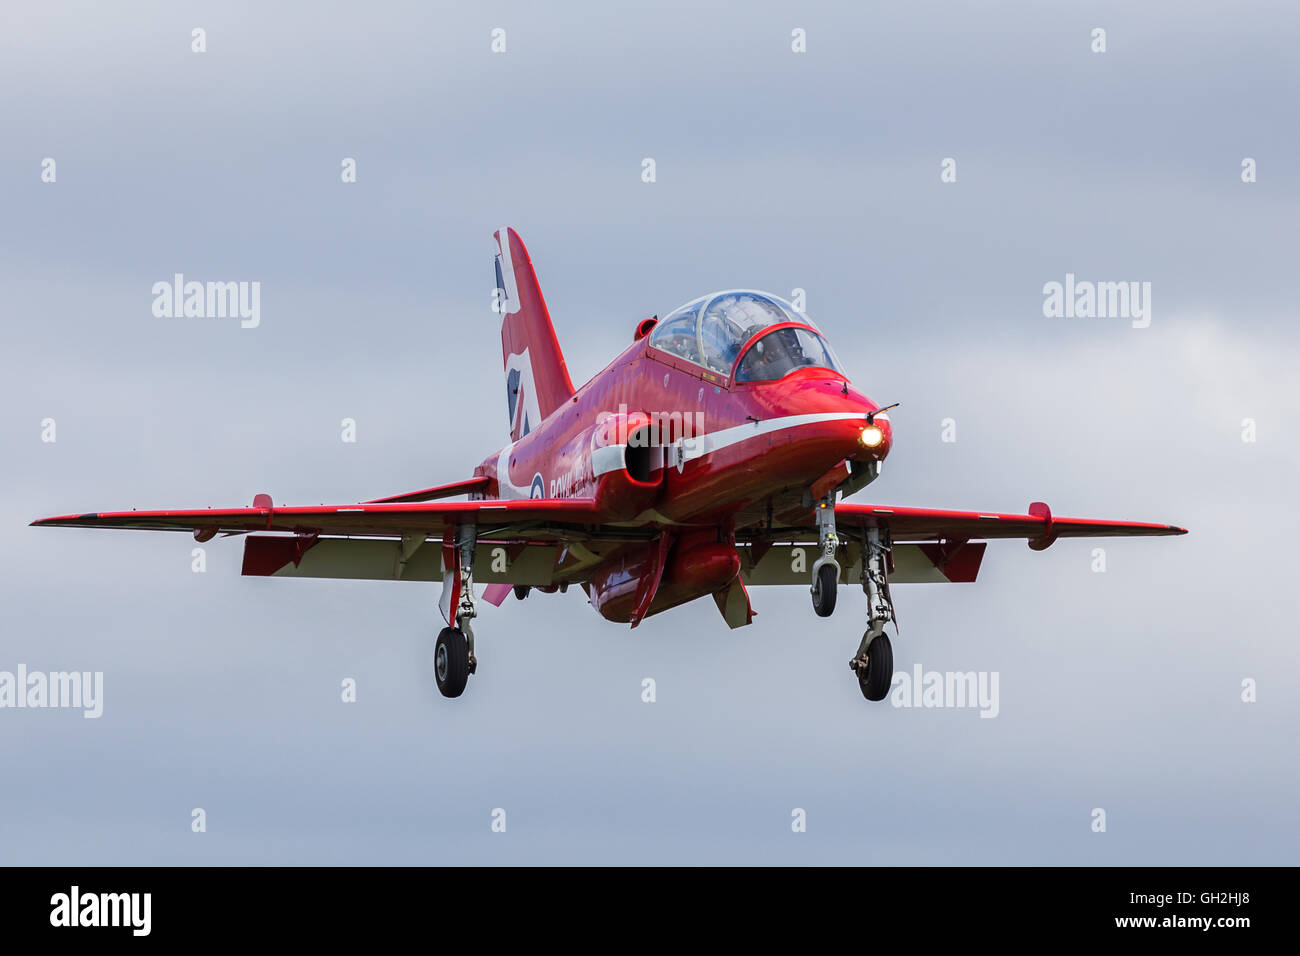 A Red Arrow from the RAF's display team fills the frame as it comes into land at Liverpool John Lennon airport. Stock Photo